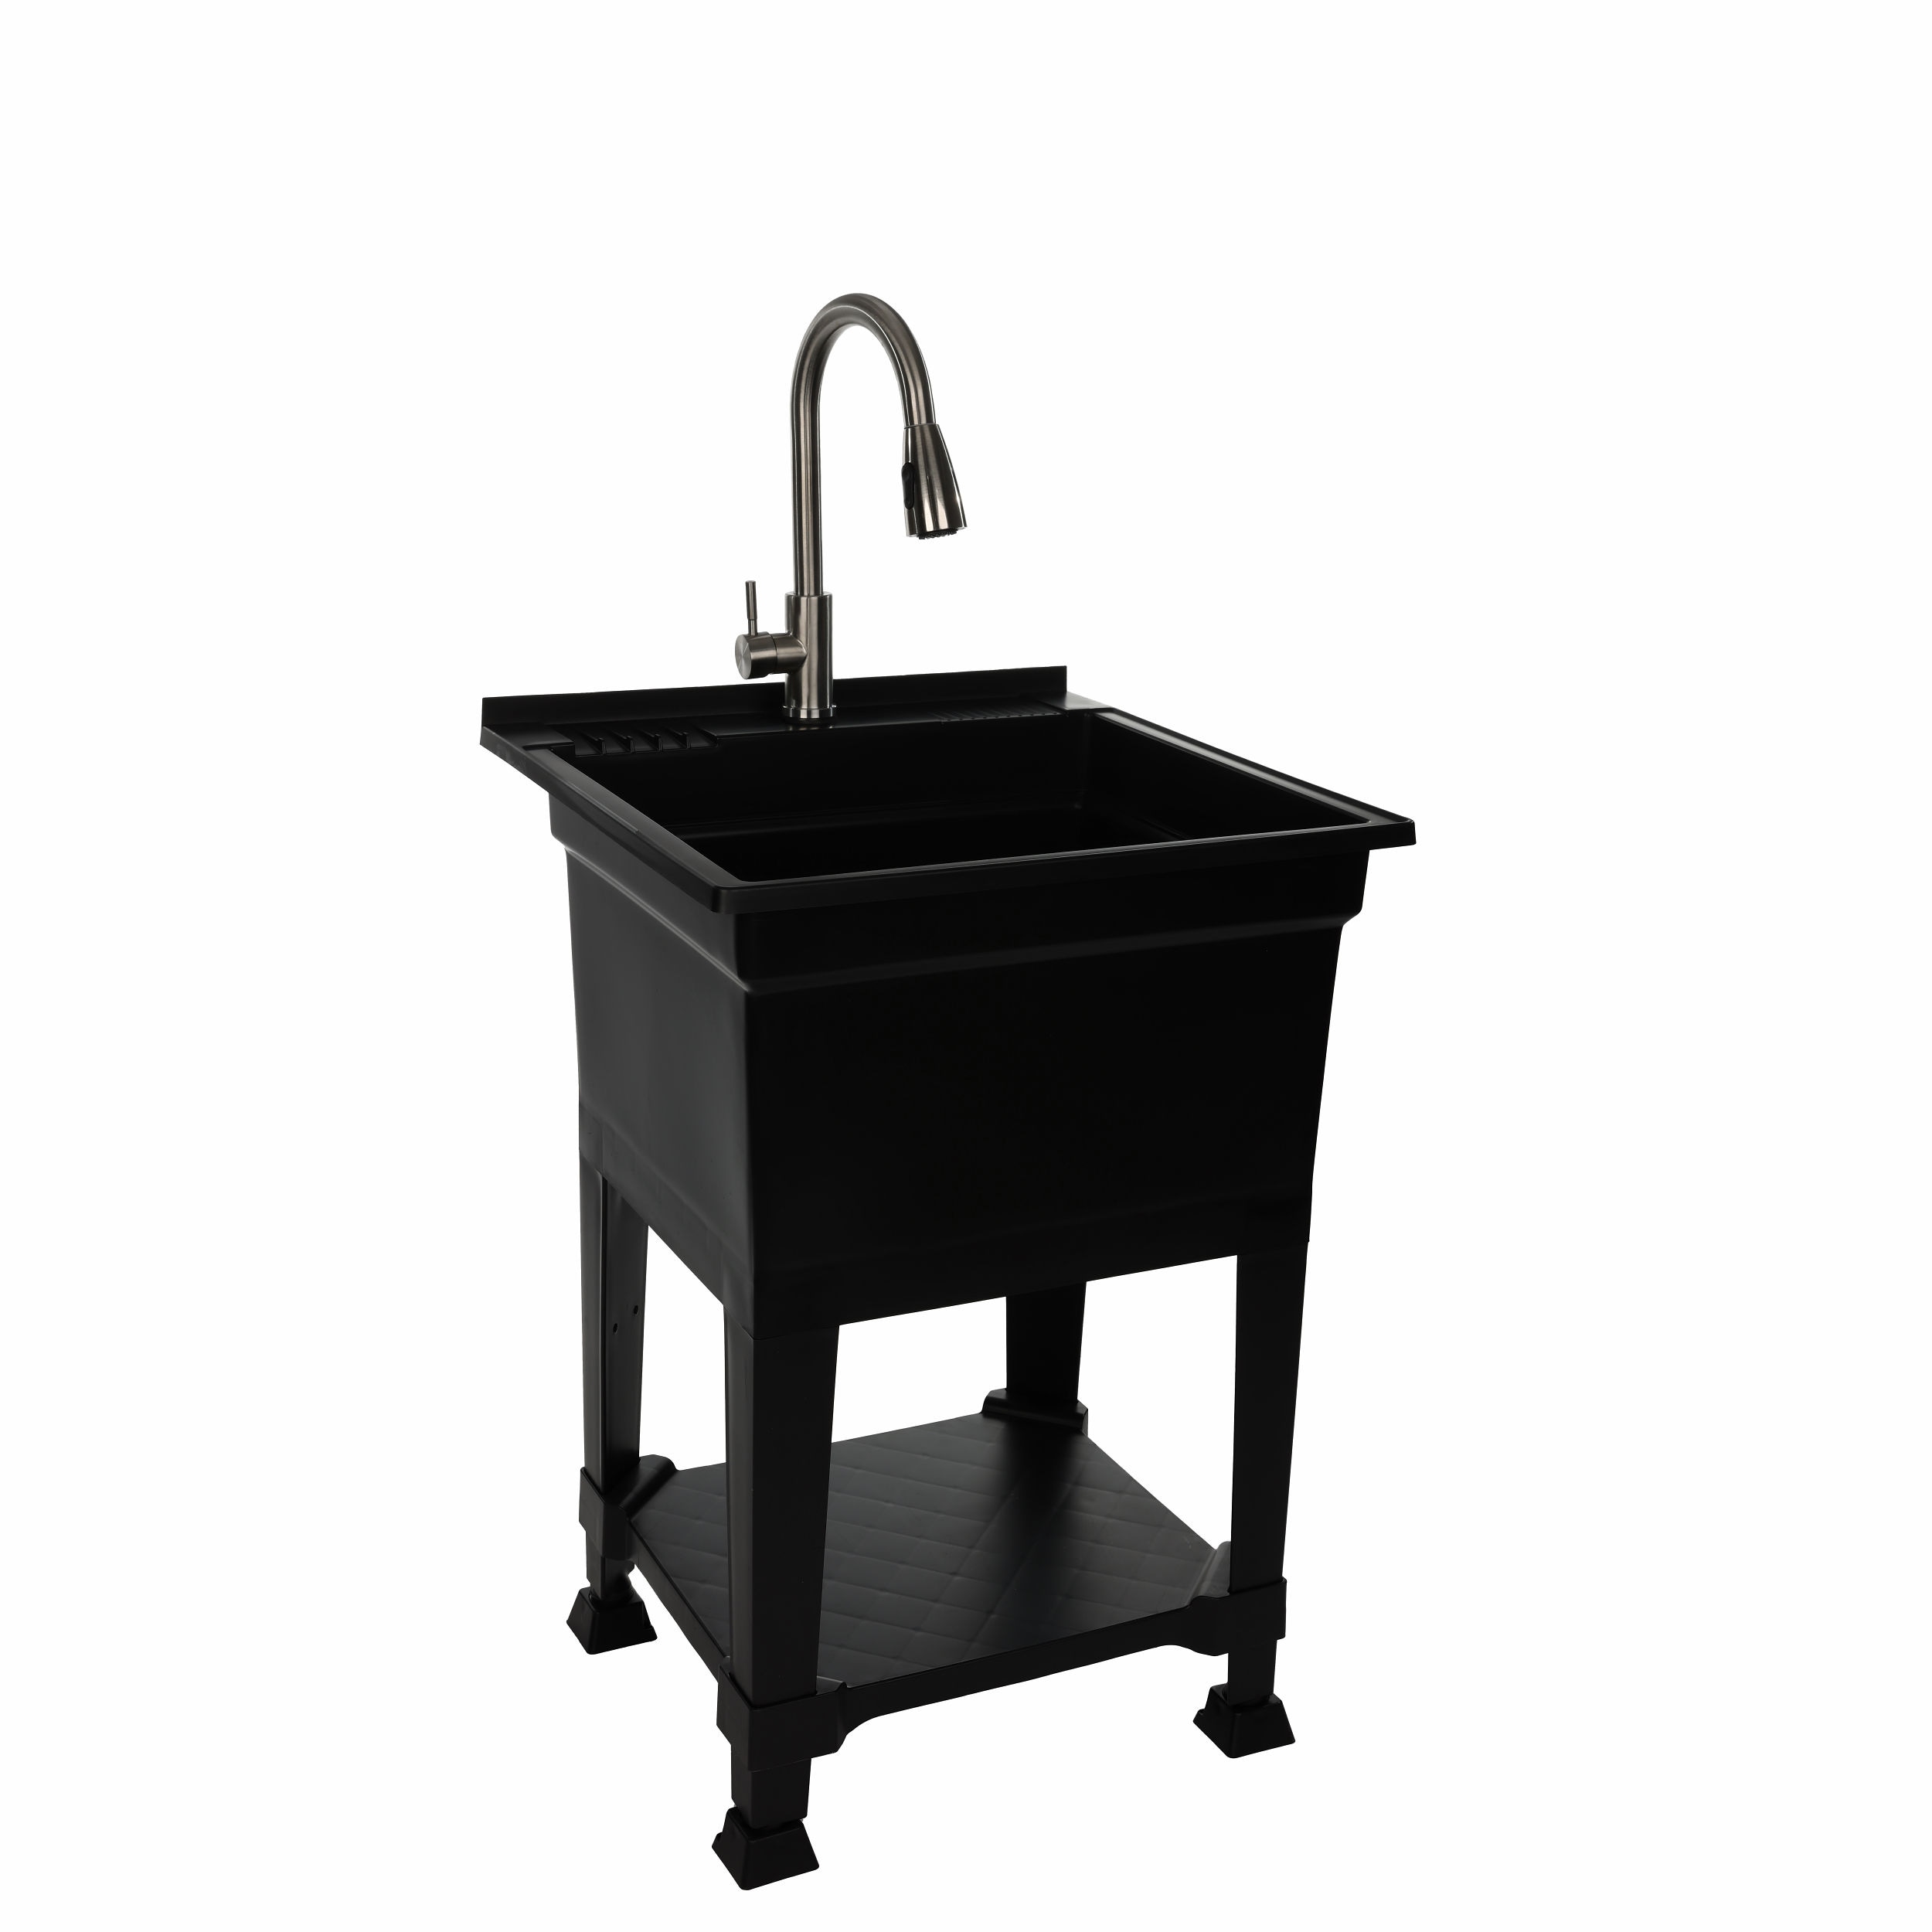 Utility Sink for Laundry Room with Cabinet and Faucet,Kitchen Sink and  Cabinet Combo Set,Bathroom Stainless Steel Vanity Sinks Black Single Bowl